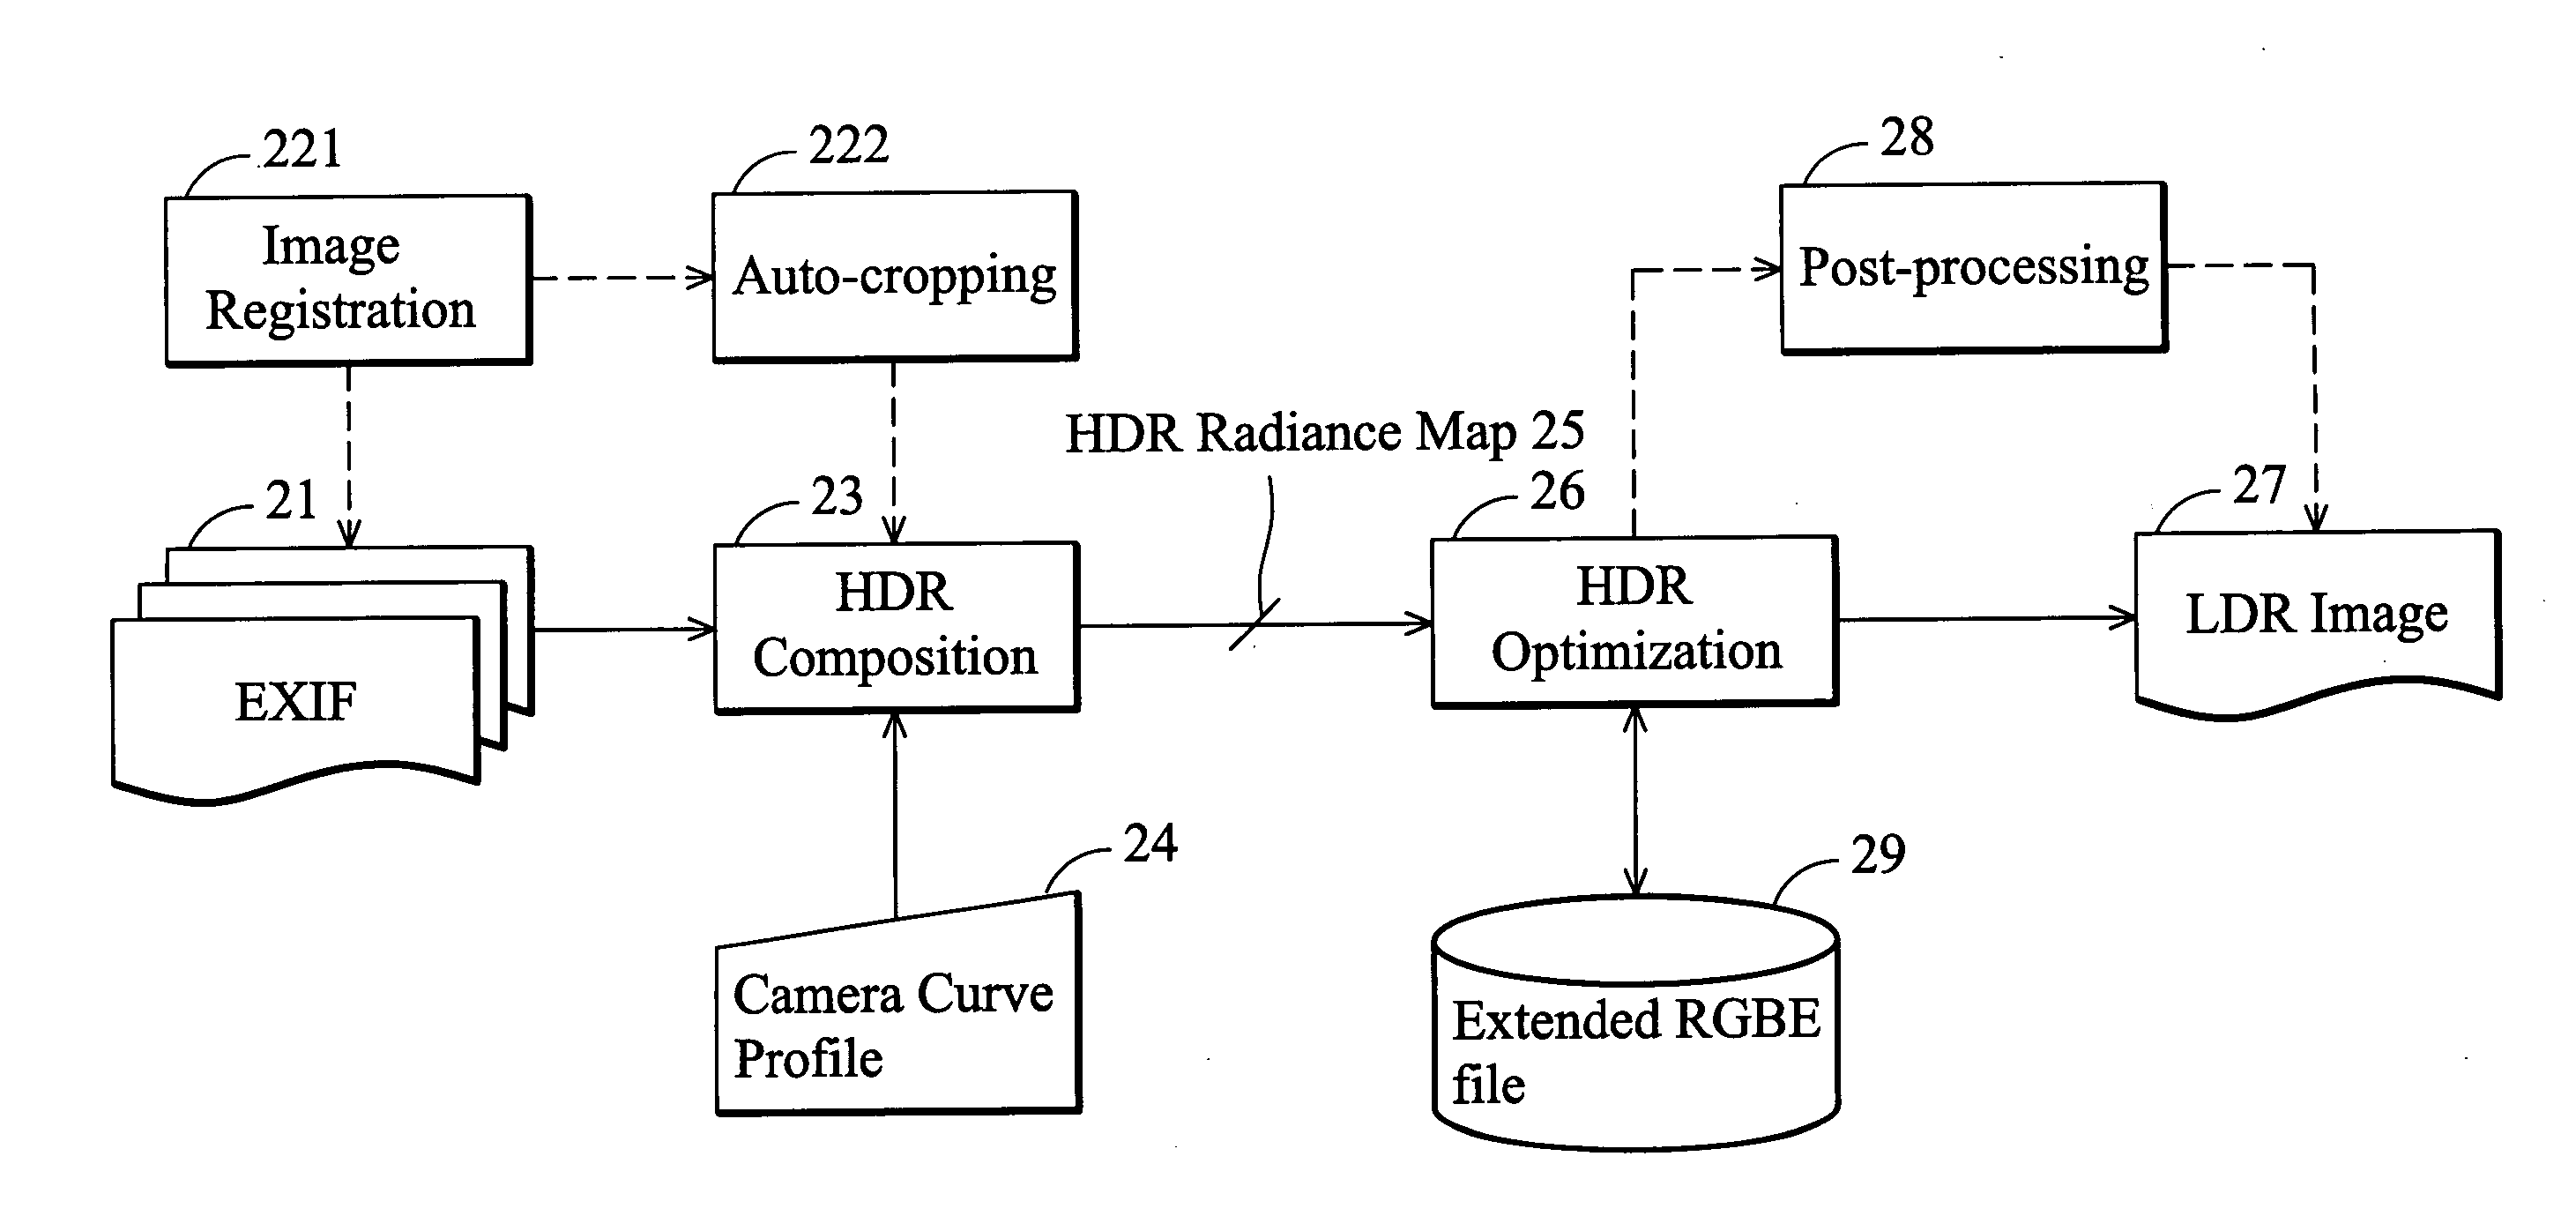 Method of HDR image processing and manipulation